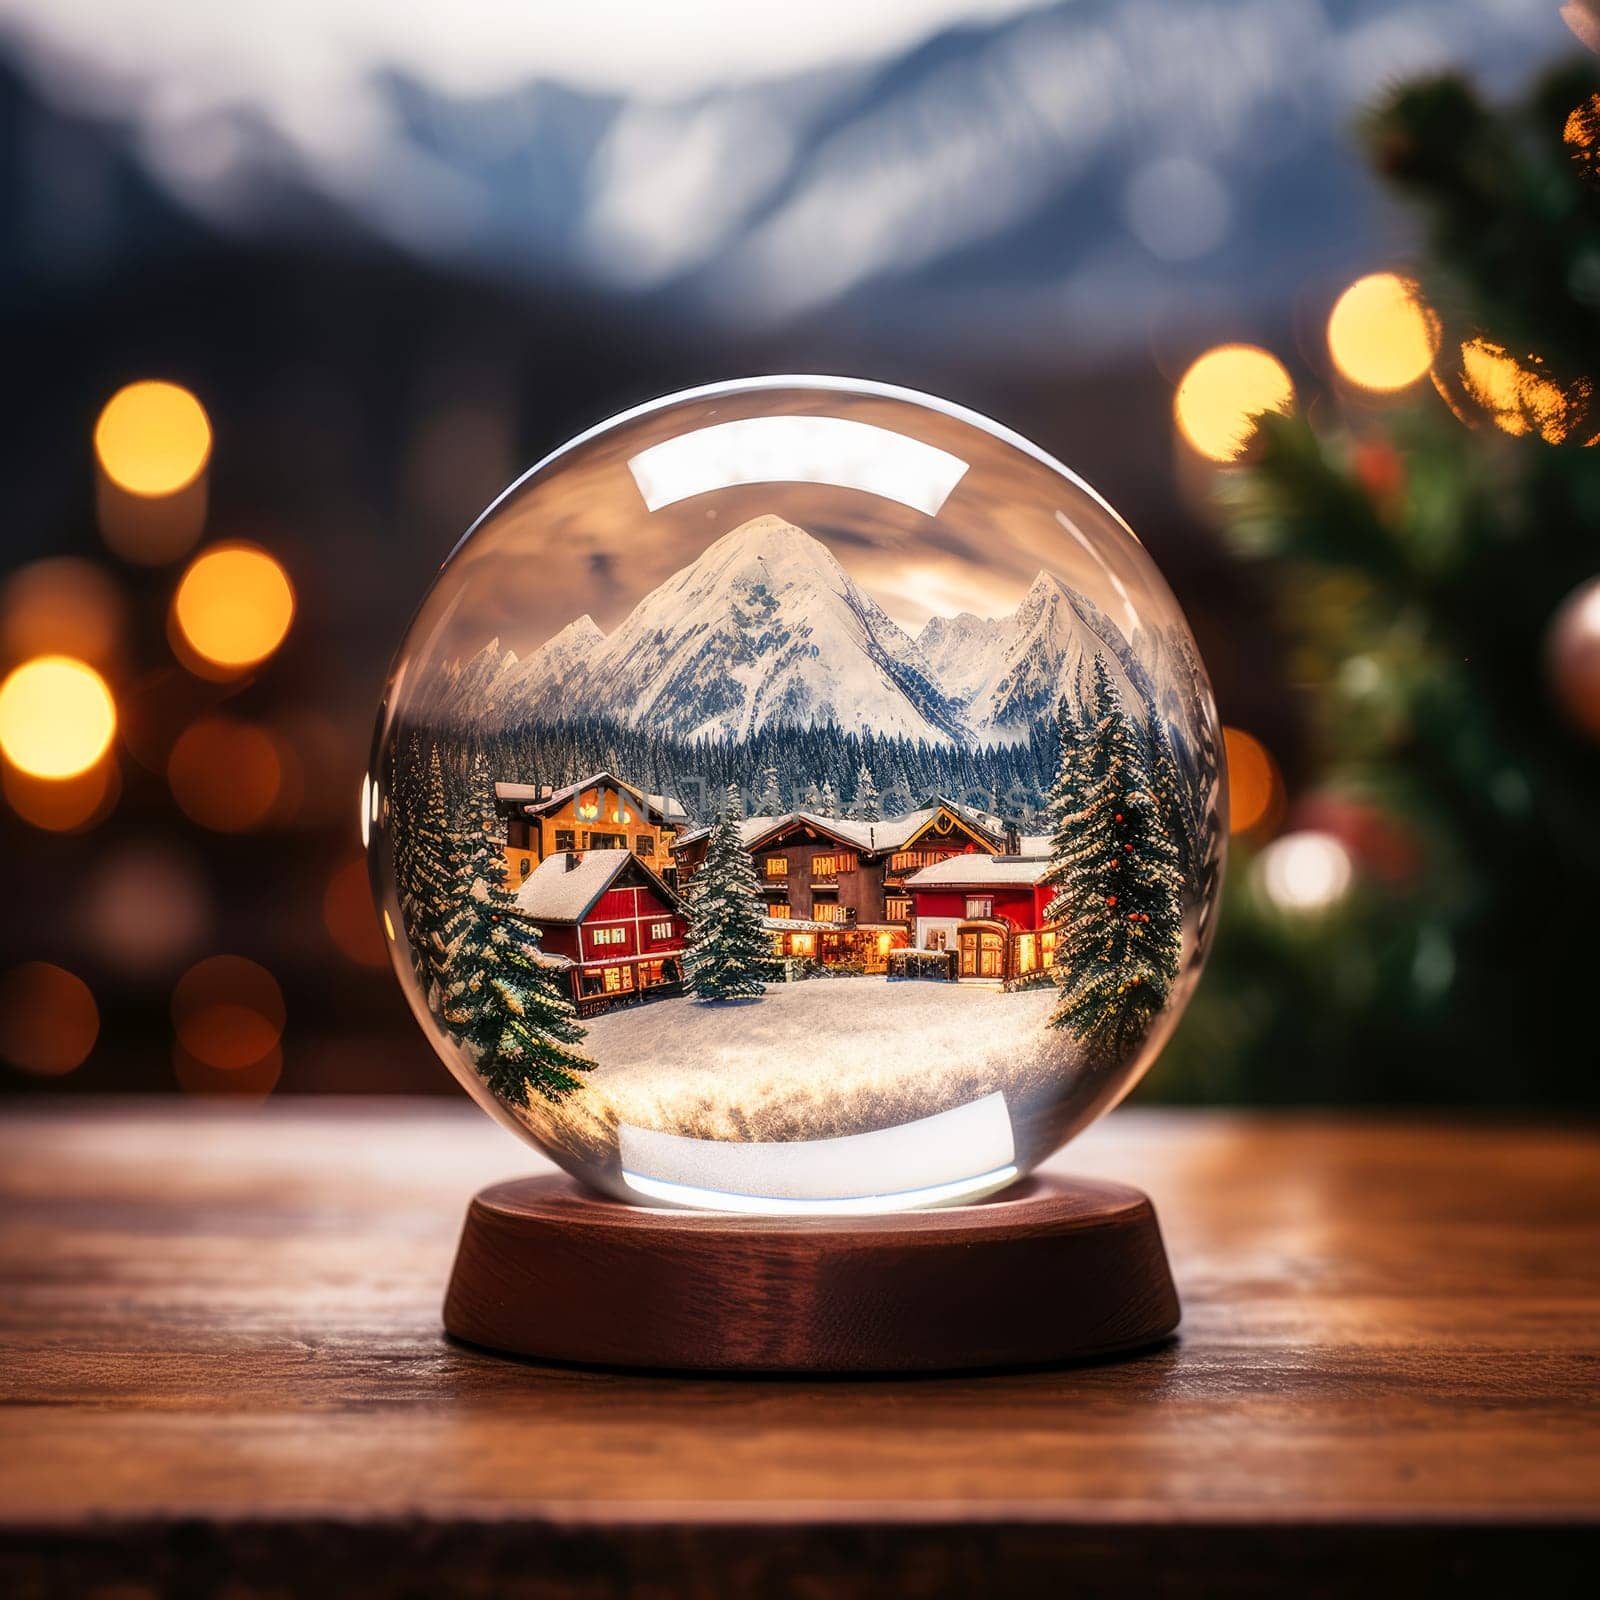 There is a blizzard, a winter landscape with a road and a blizzard, a spruce house, in a glass Christmas globe. The background is exquisite bokeh.